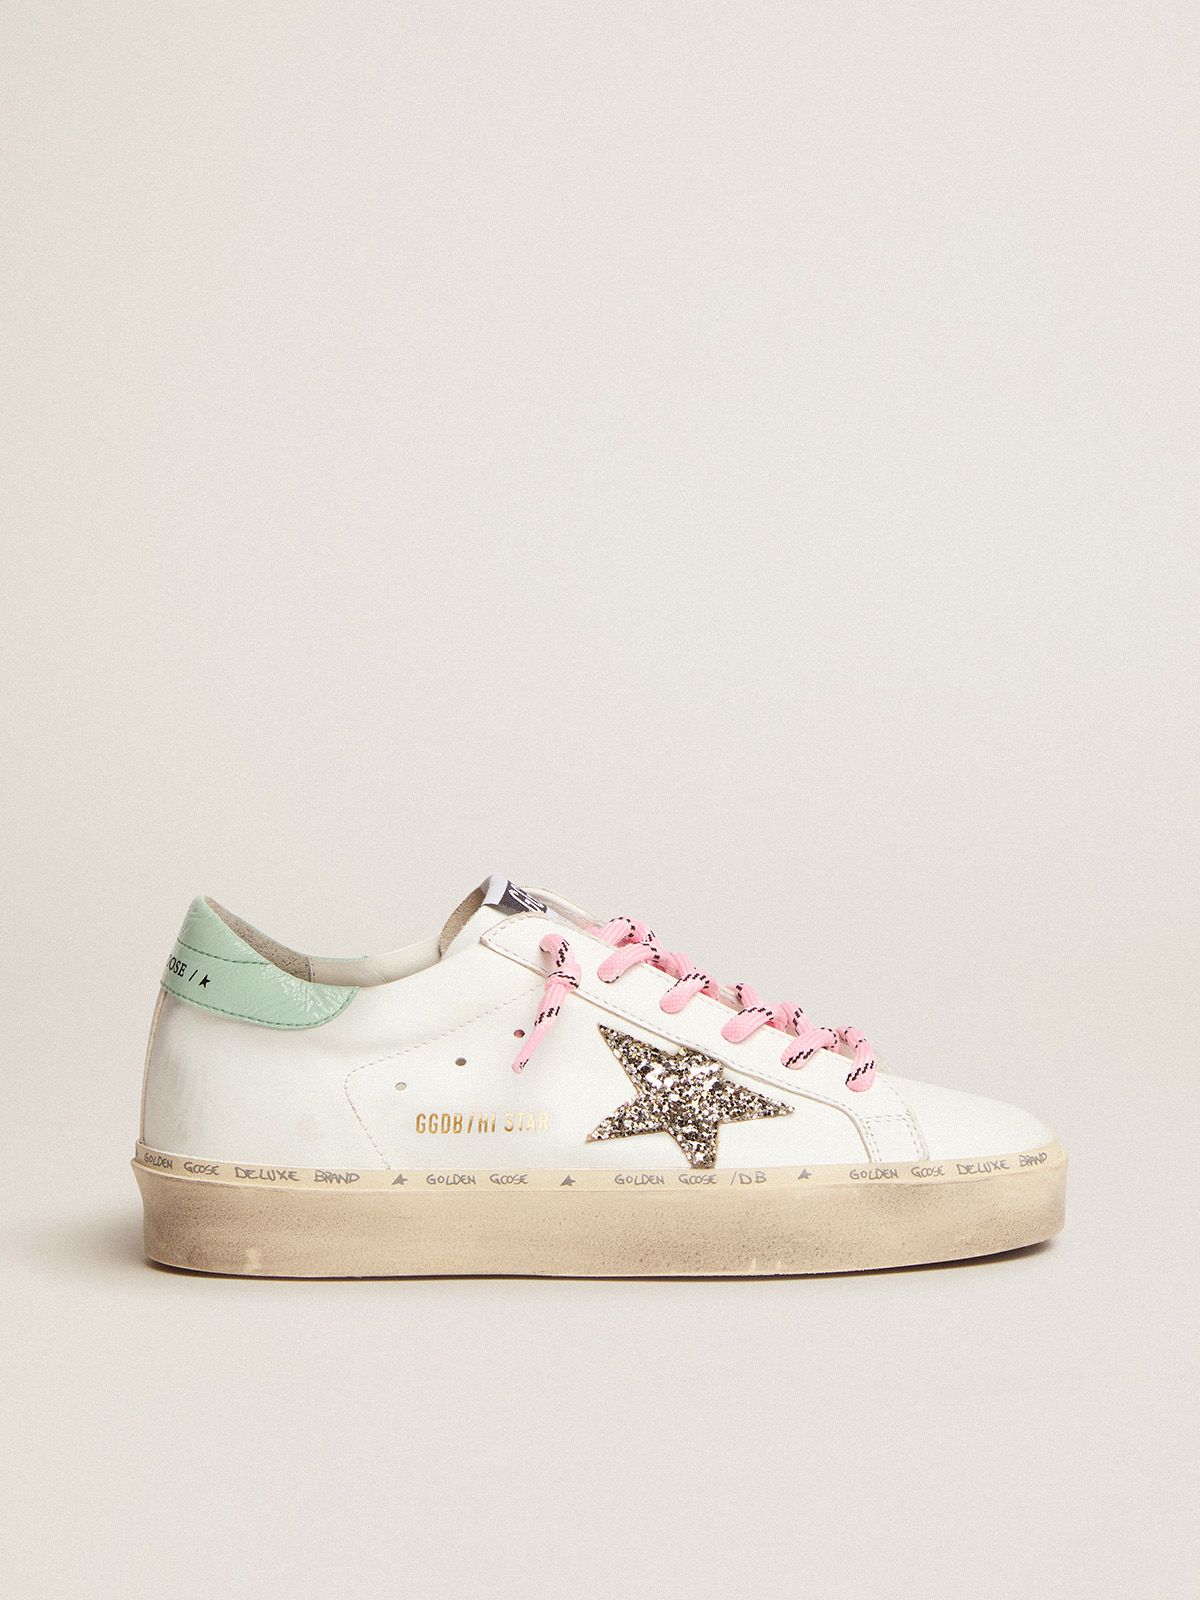 golden goose star and Star glitter sneakers aqua-green patent heel with platinum Hi leather tab